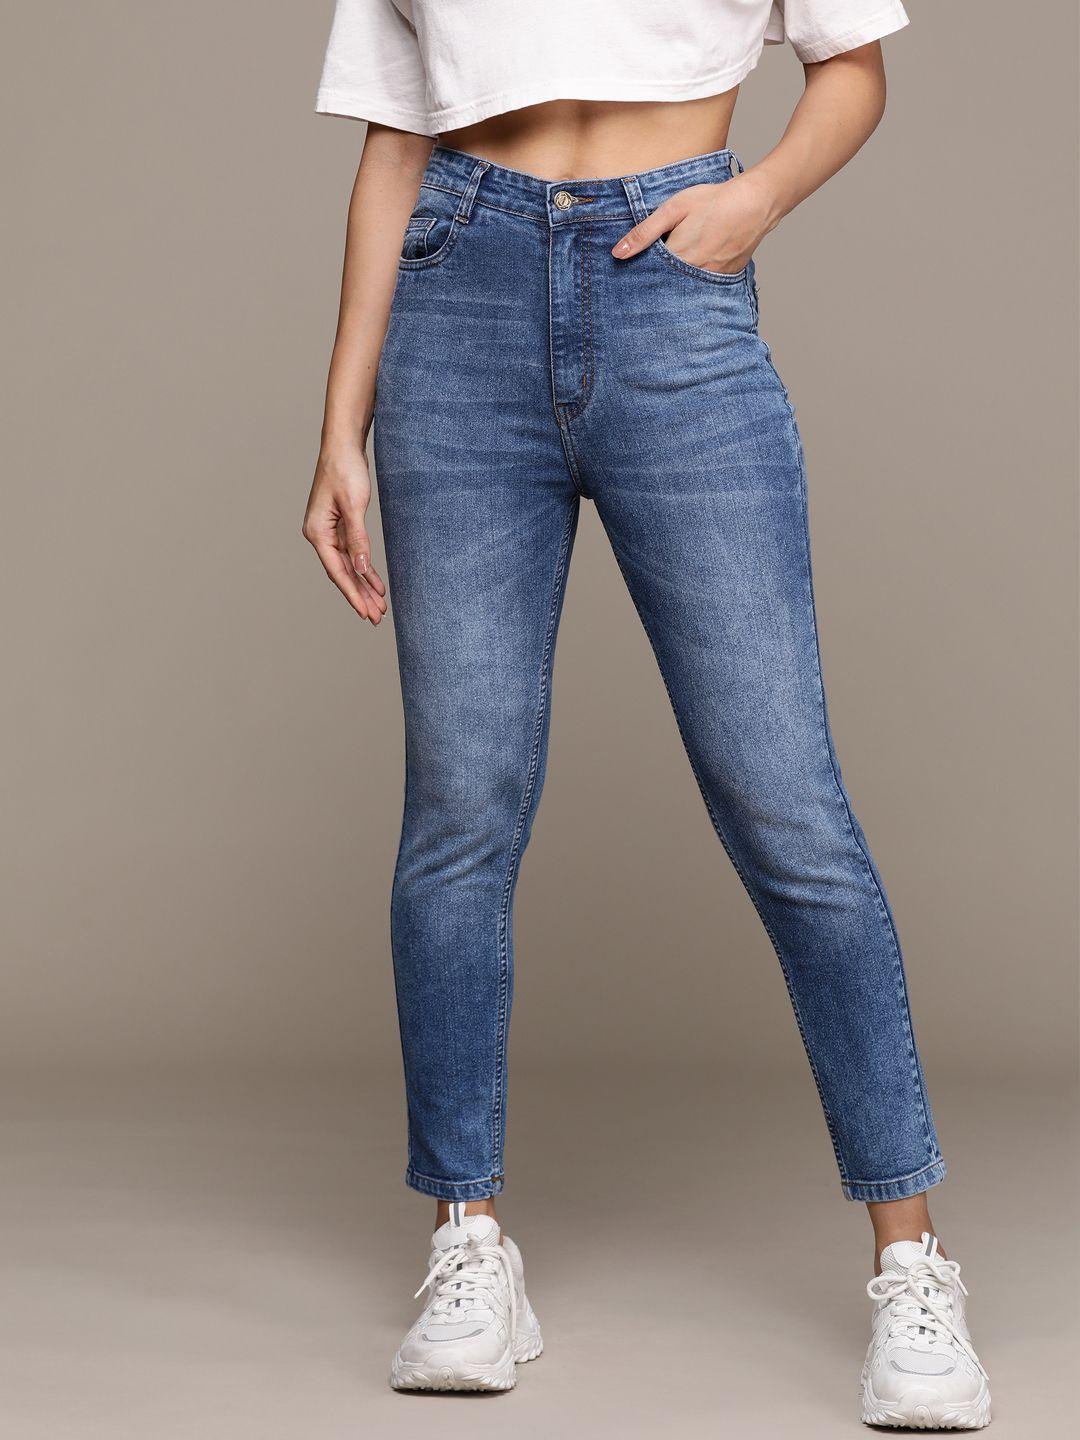 roadster-skinny-fit-high-rise-light-fade-stretchable-jeans